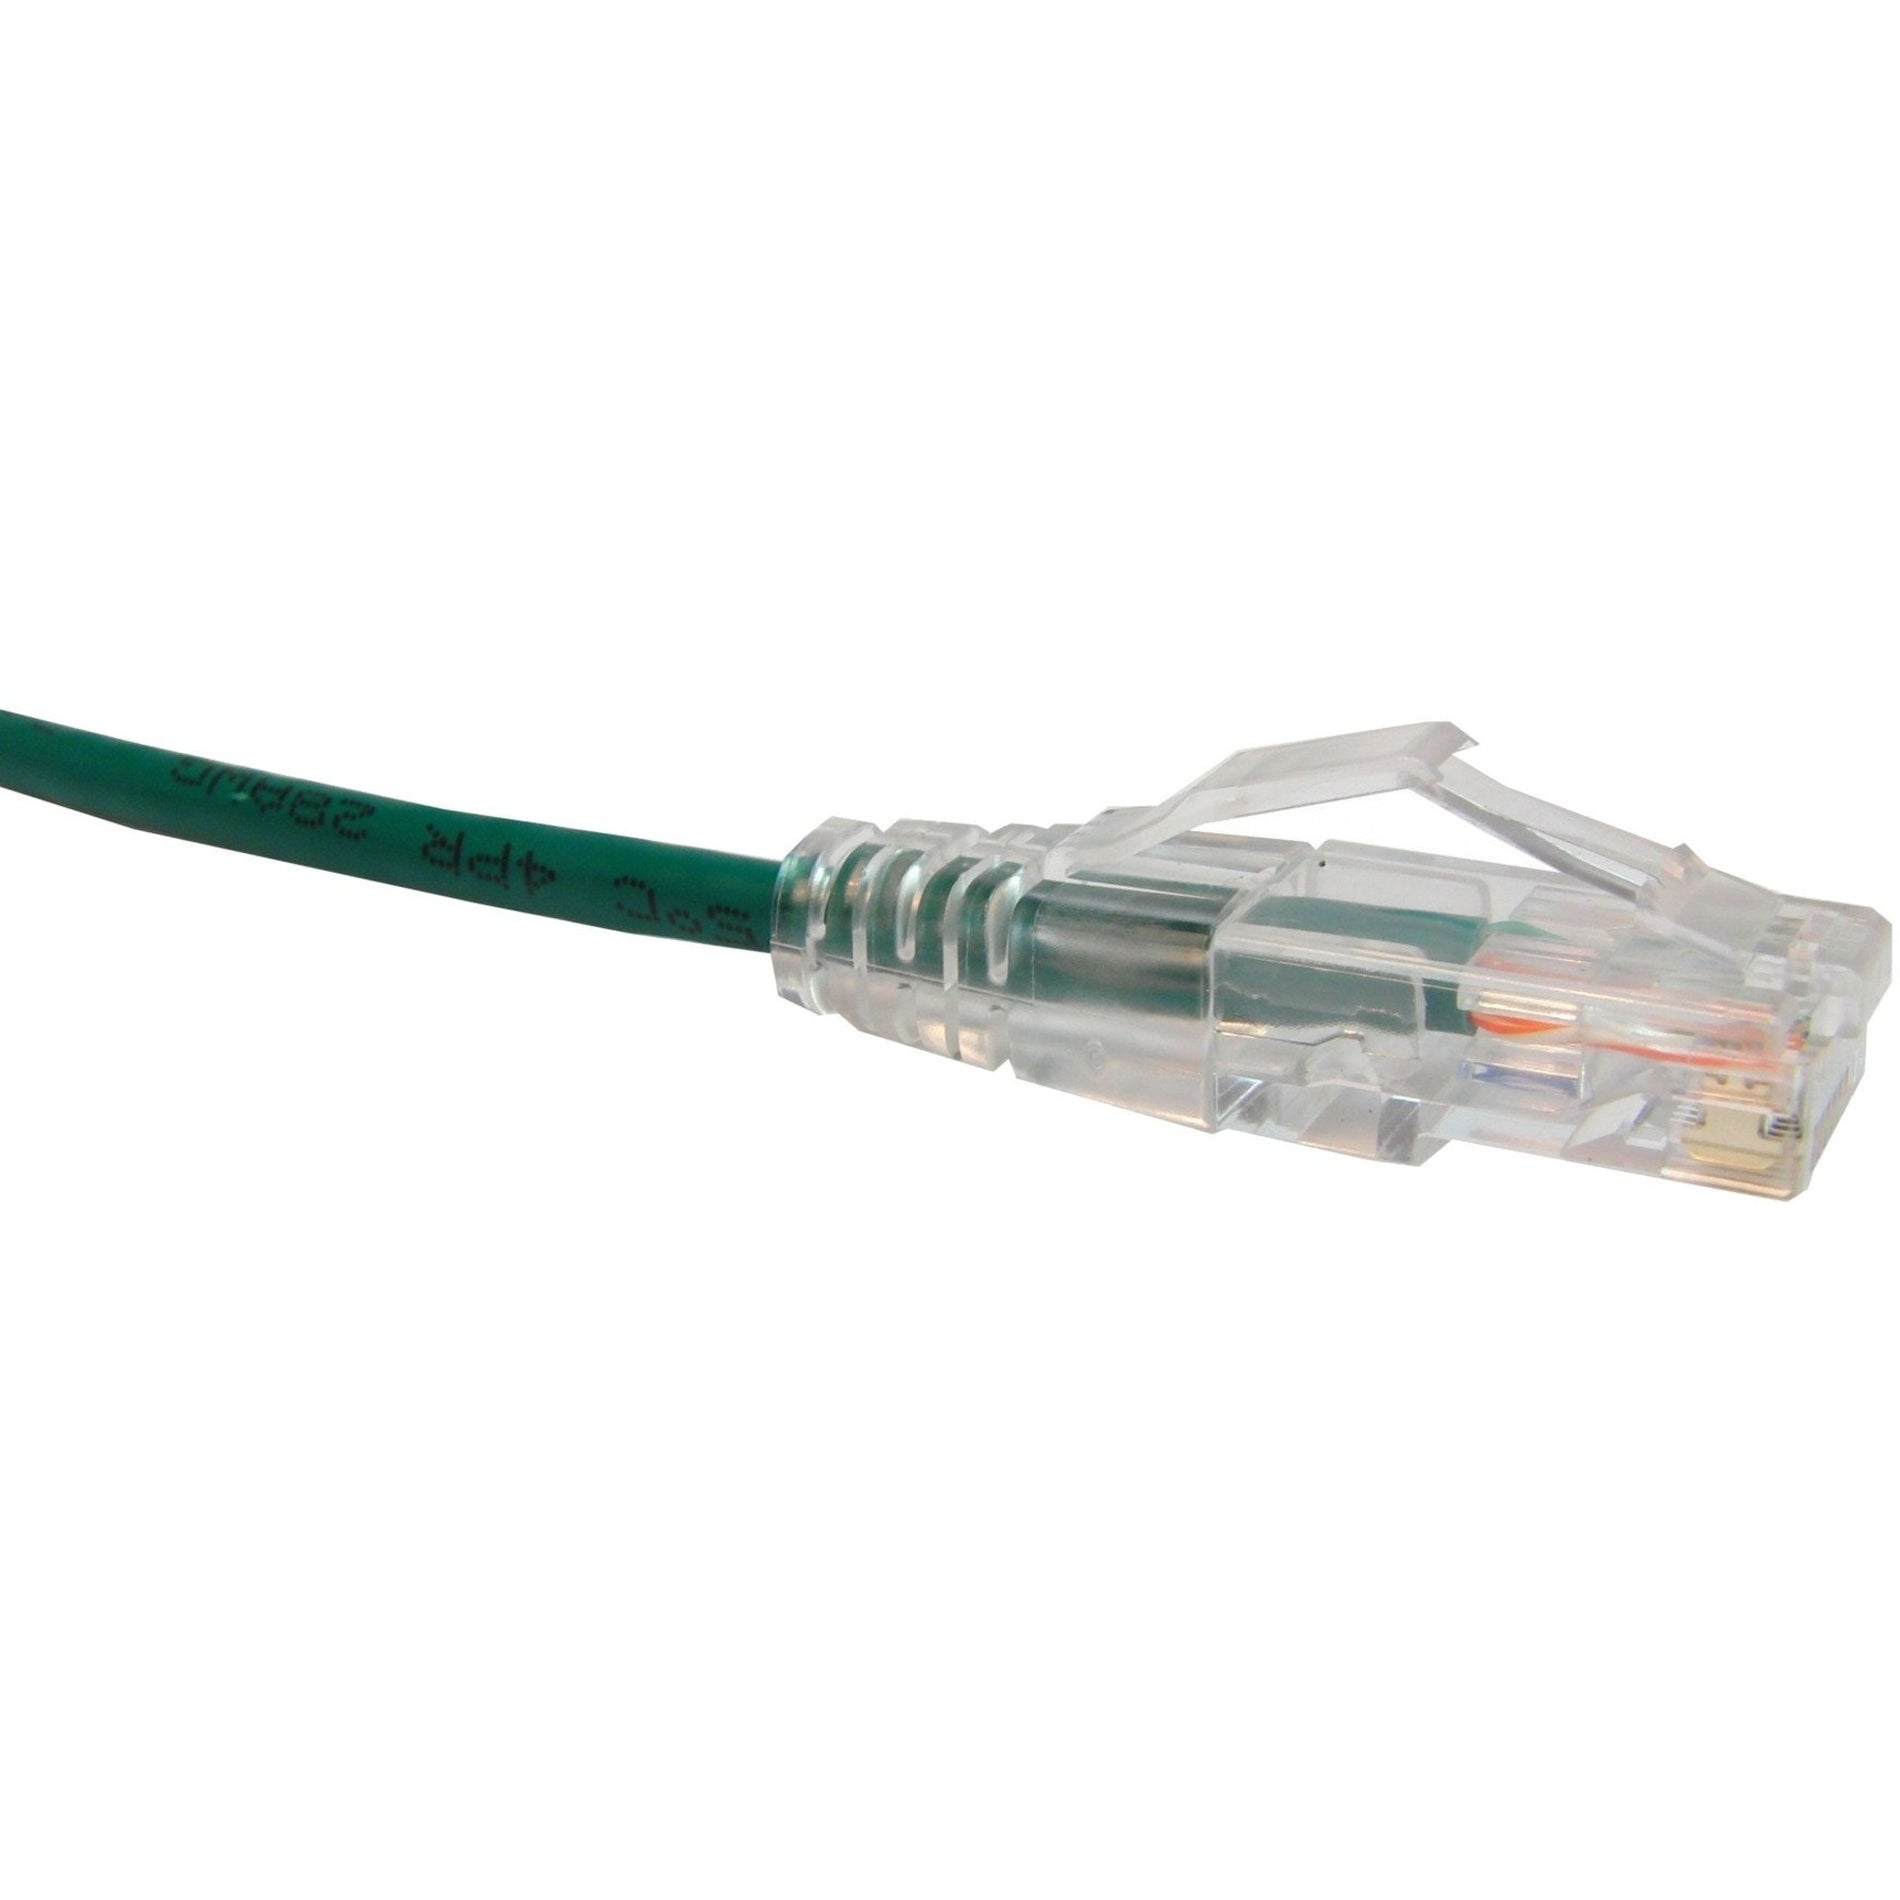 Unirise CS6-10F-GRN Clearfit Slim Cat6 Patch Cable, Green, 10ft